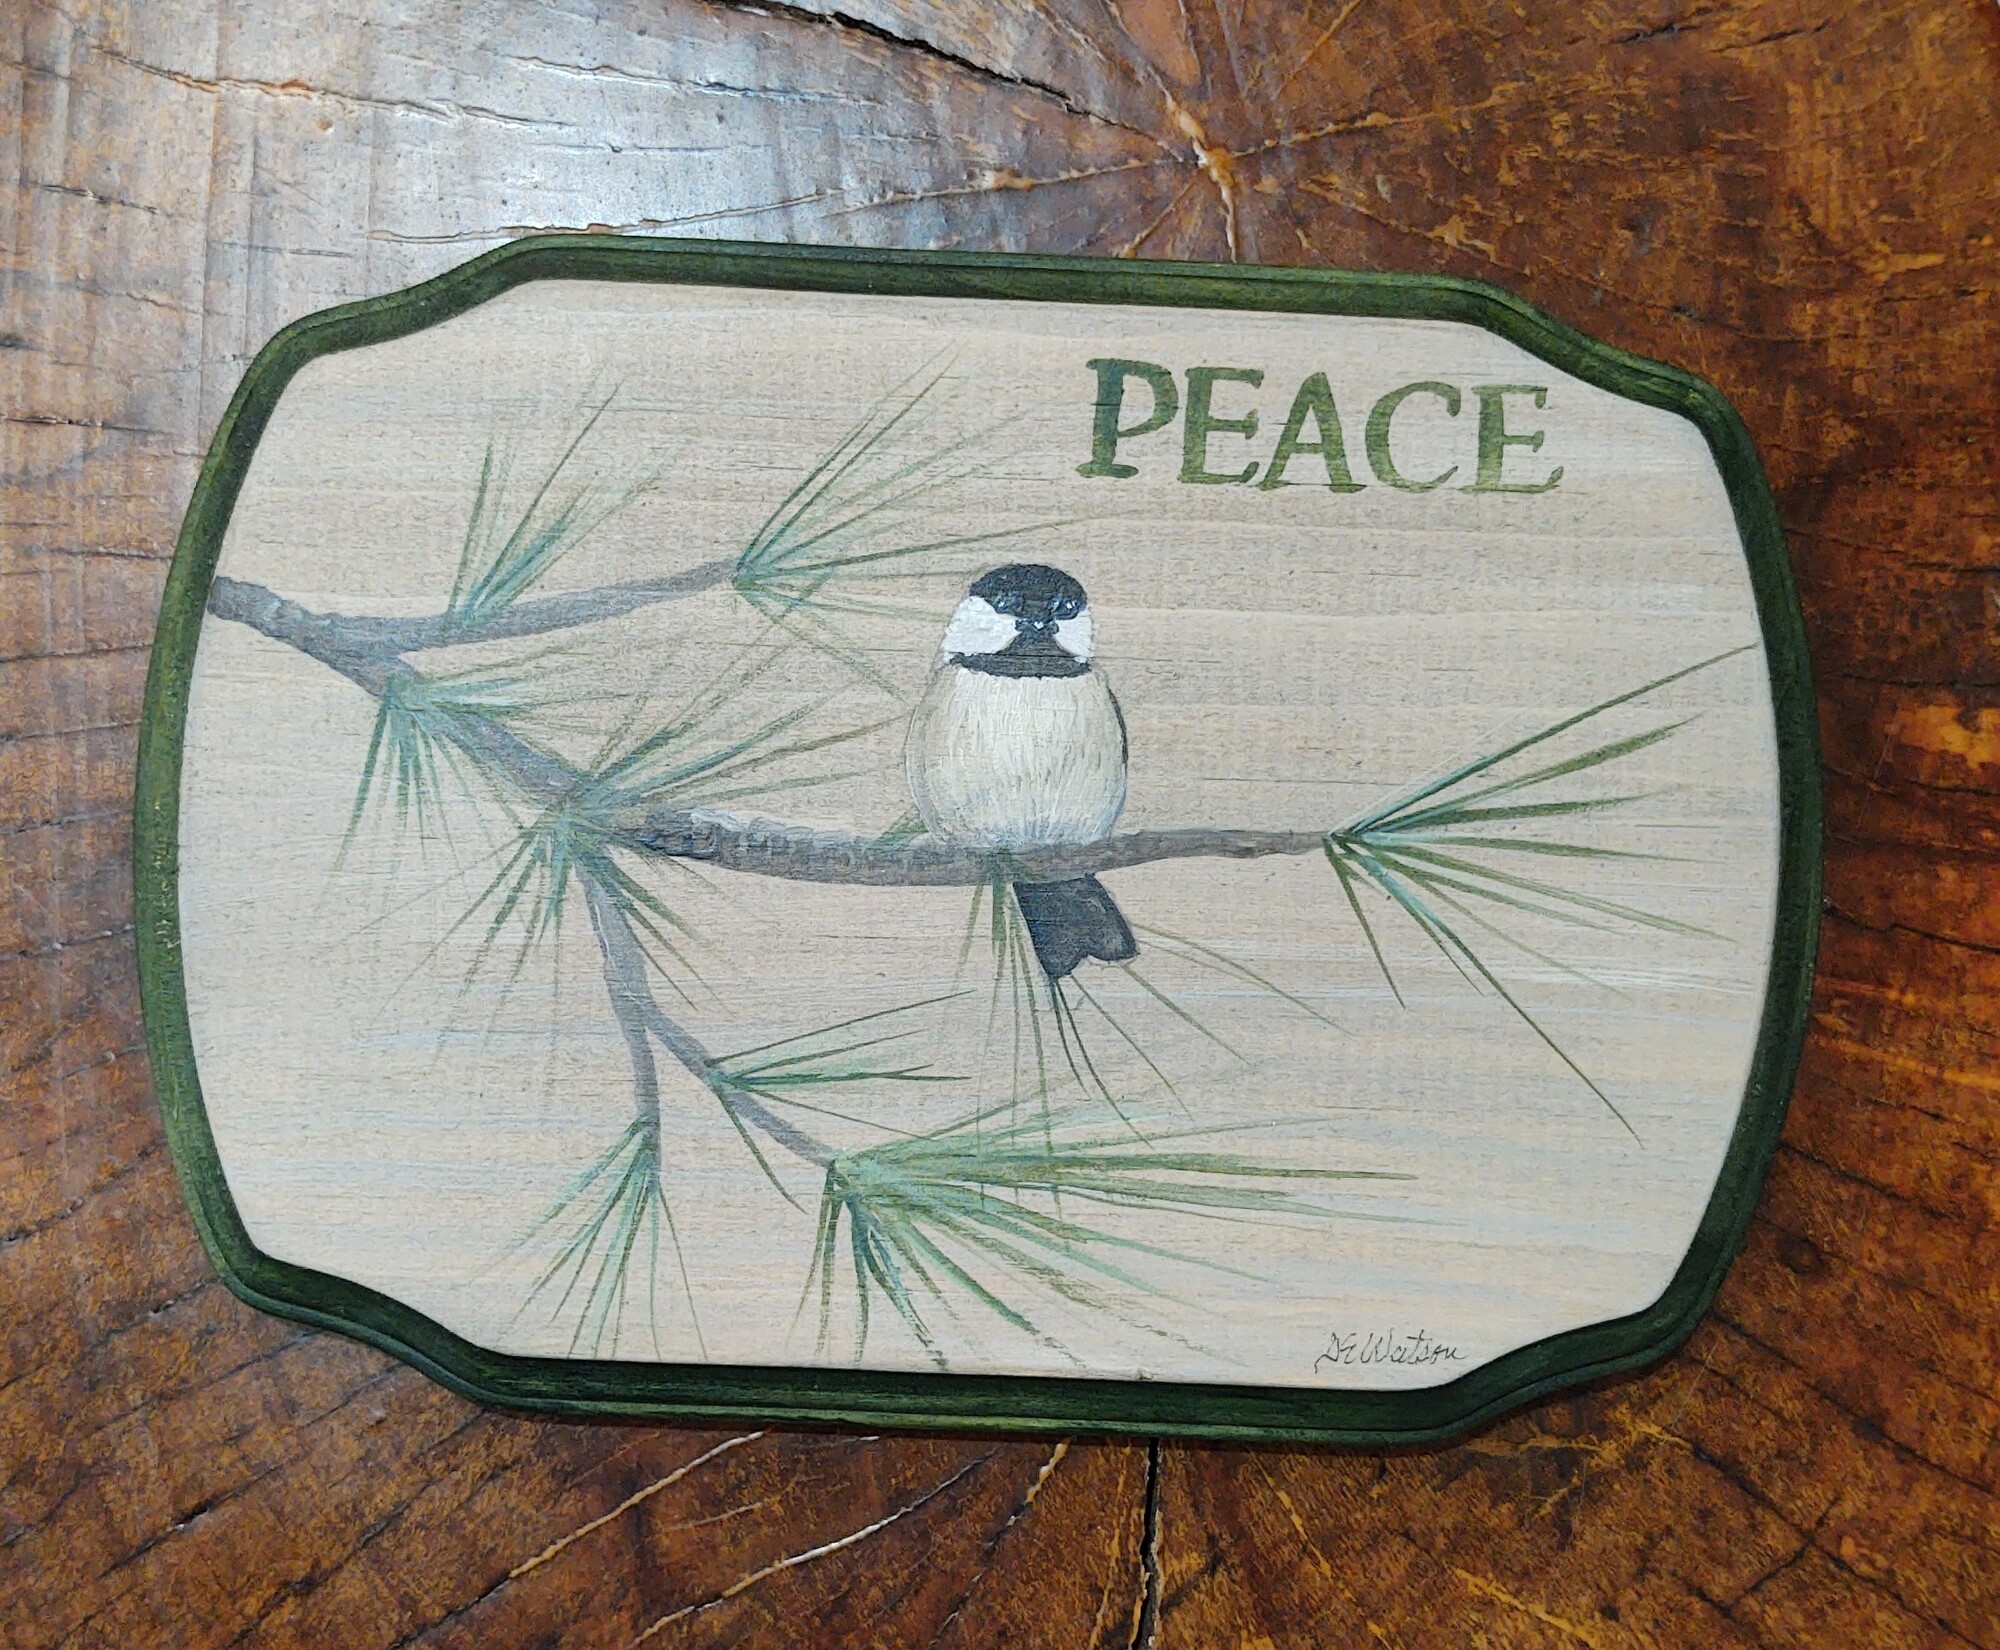 Chickadee Peace
Hand Painted Wooden Plaque
Size: 6.5x9.5 inches